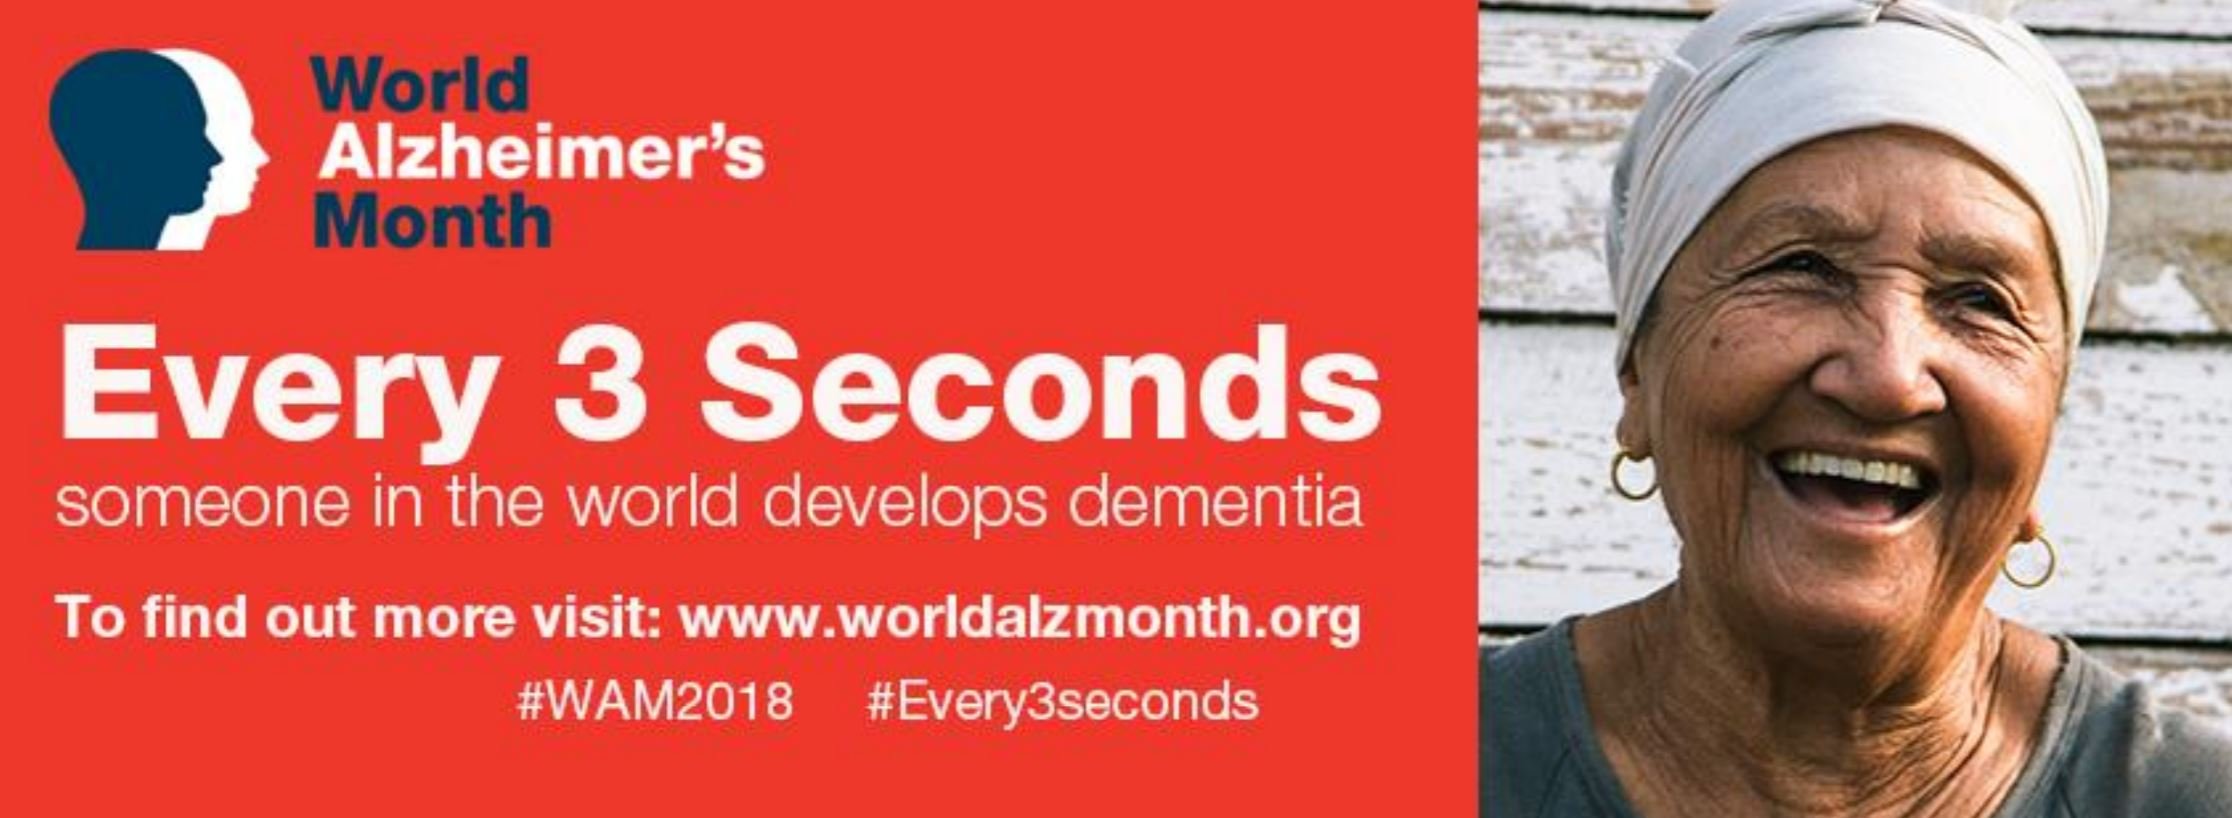 World ALzheimers Month with Arjo 2018